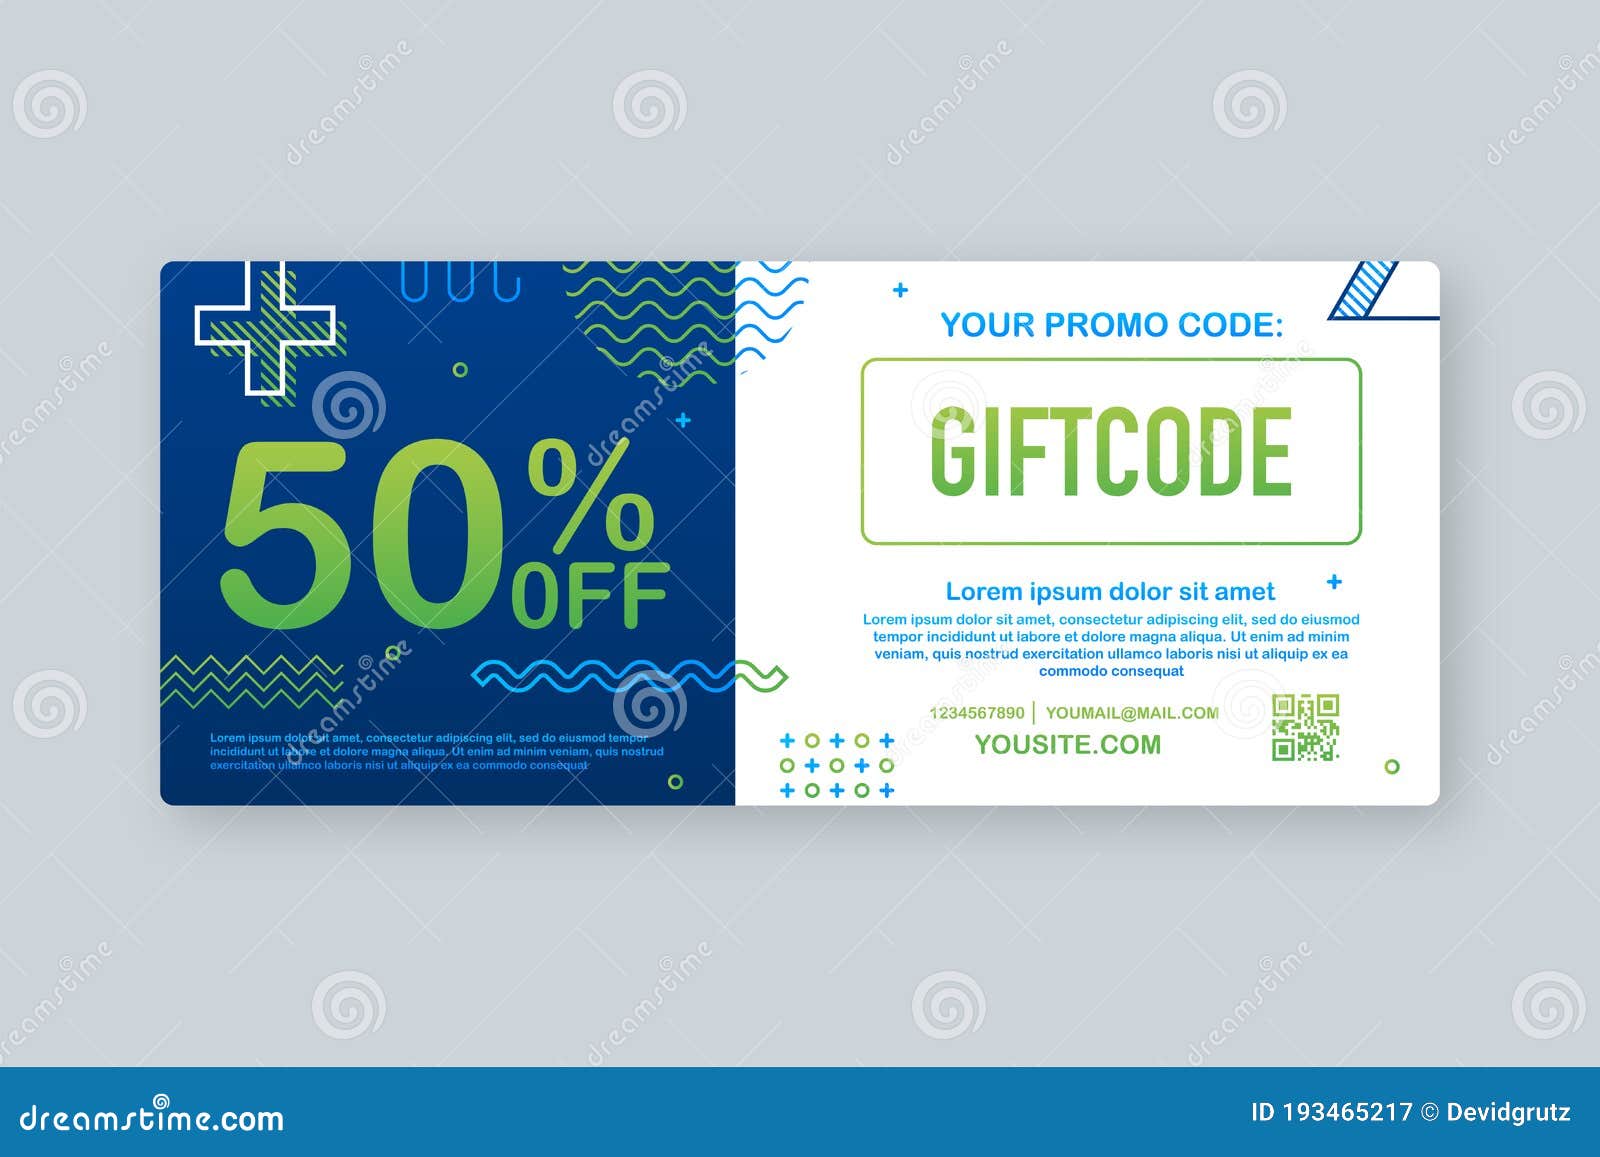 What is A Promo Code (Coupon Code) and How It Works?